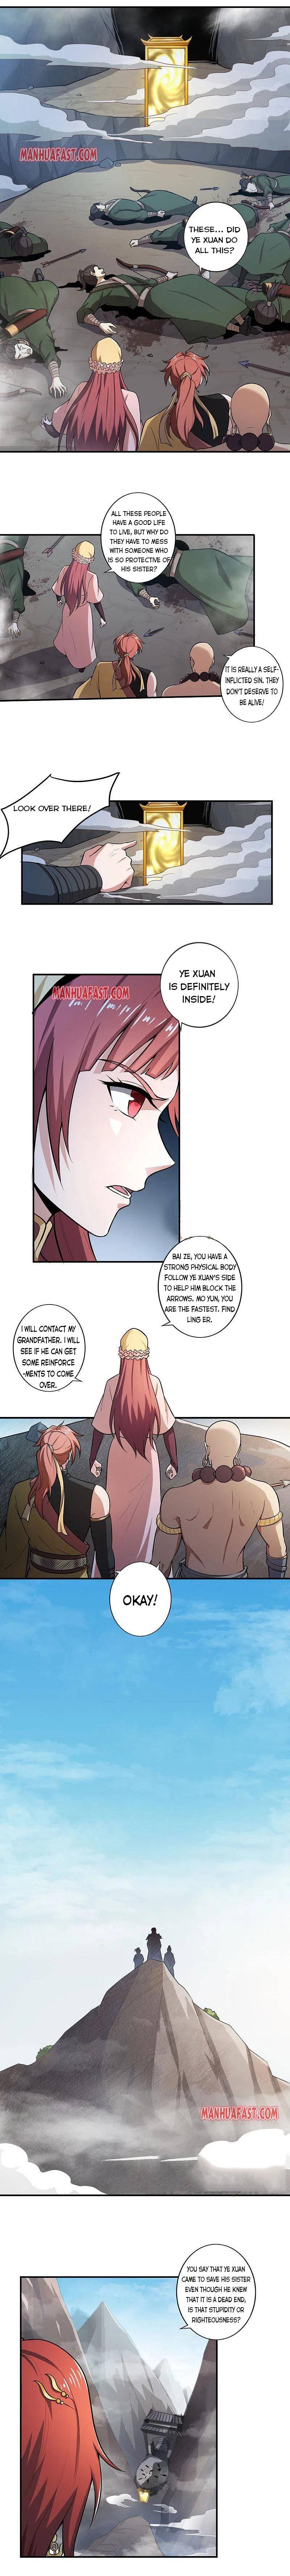 One Sword Reigns Supreme Chapter 125 - Page 1